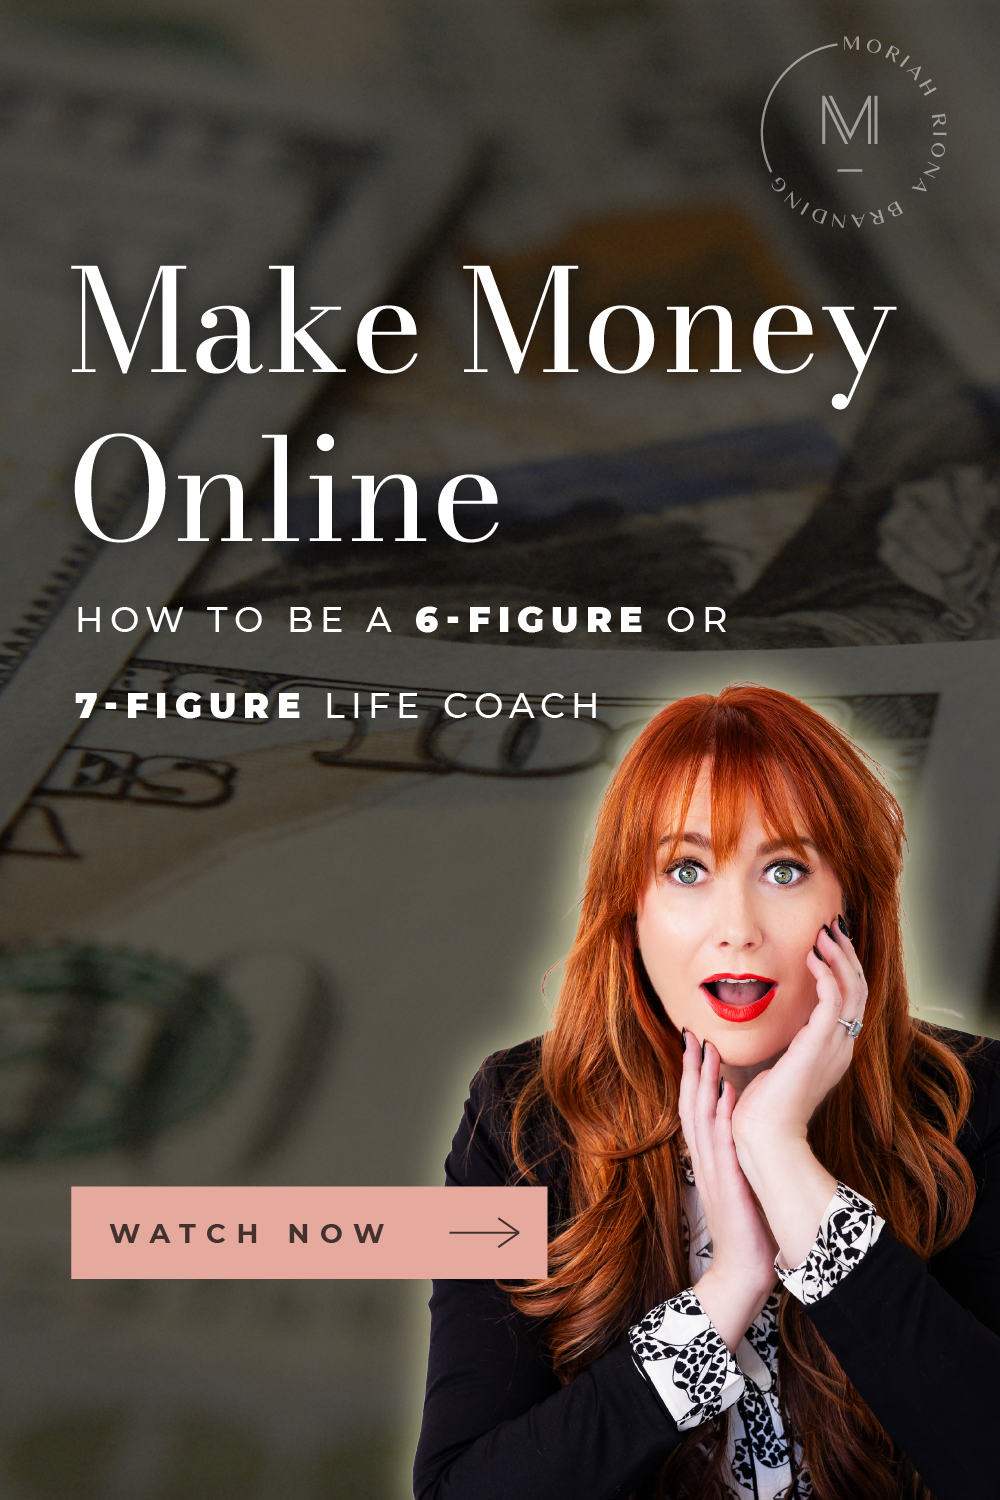 Want to turn your passion into profit and make money online as a coach? This blog post is for you! Learn how to transform your personal brand with my best entrepreneur tips—so you can start building your coaching empire. #luxurybrand #lifecoach #lifecoaching #entrepreneurtips